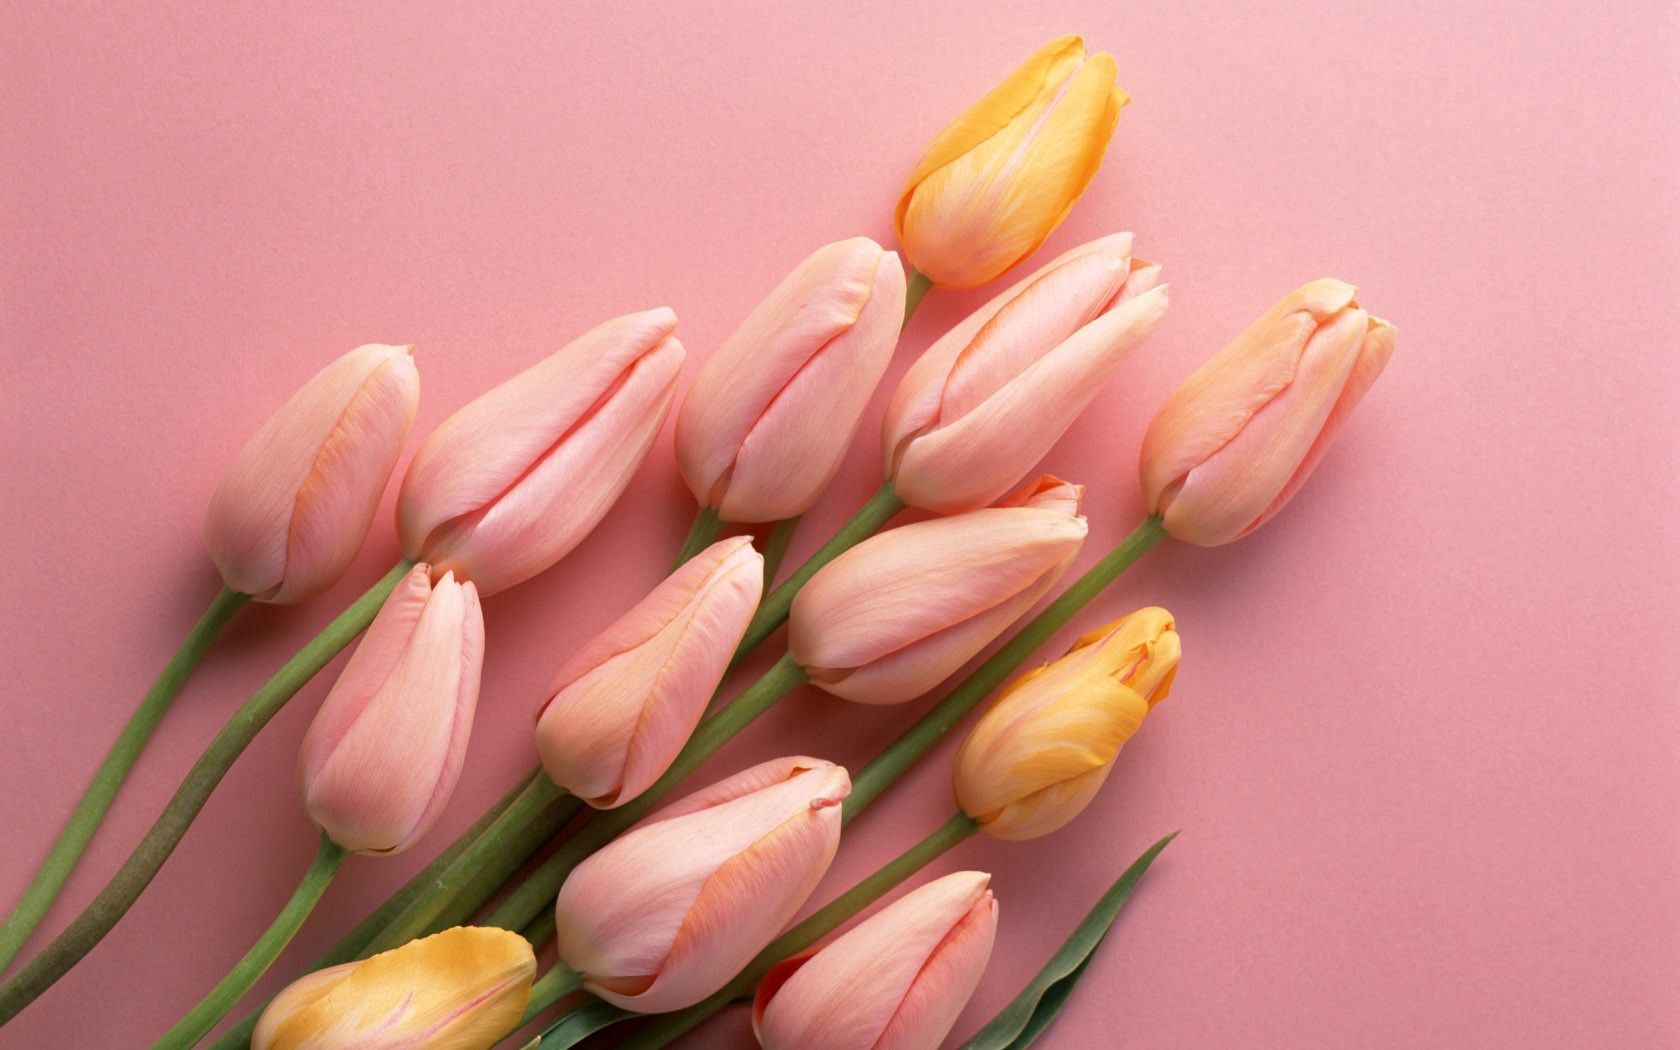 A bunch of flowers in pink and yellow - Tulip